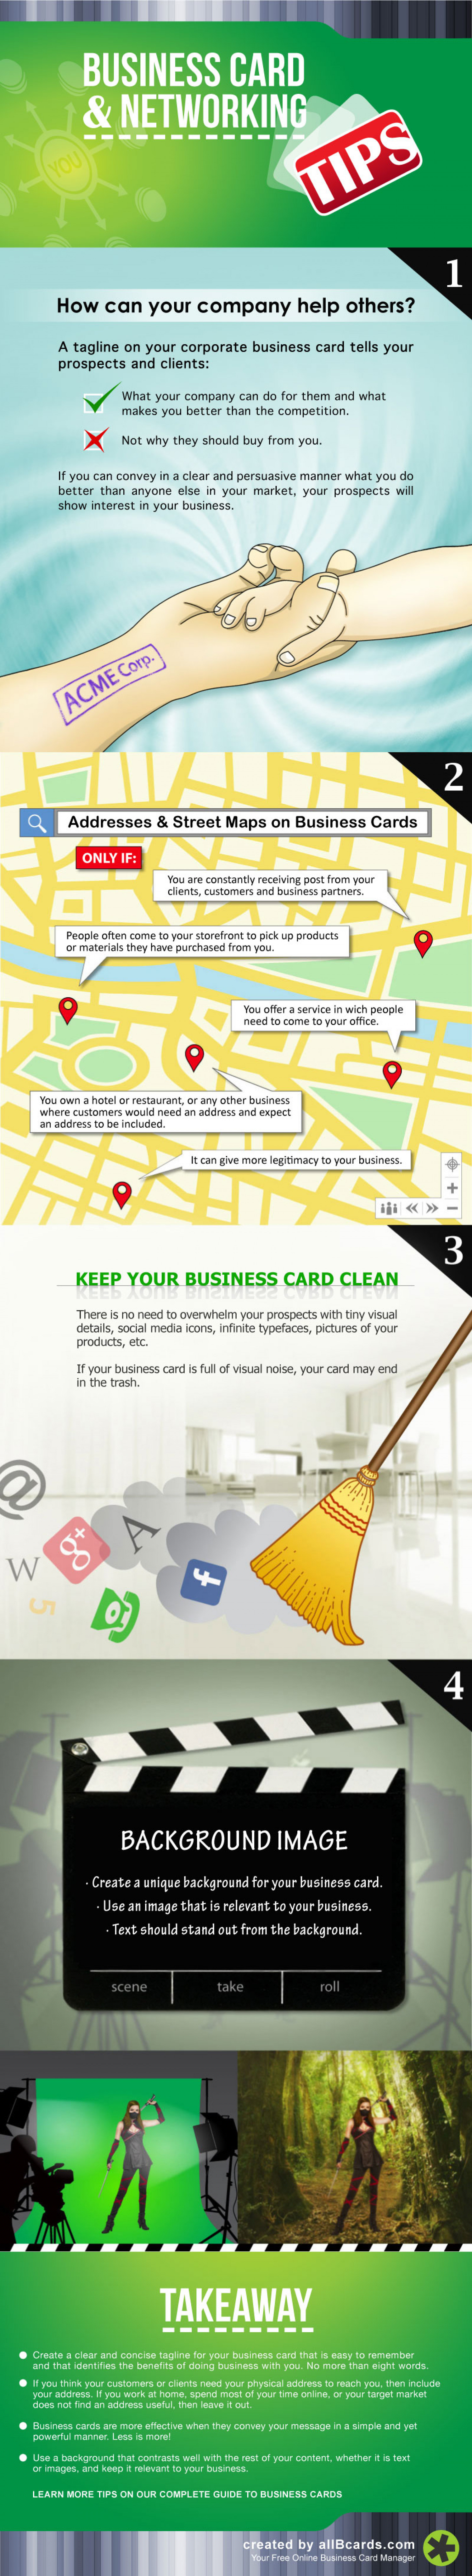 Turn Your Business Cards into Valuable Relationships Infographic